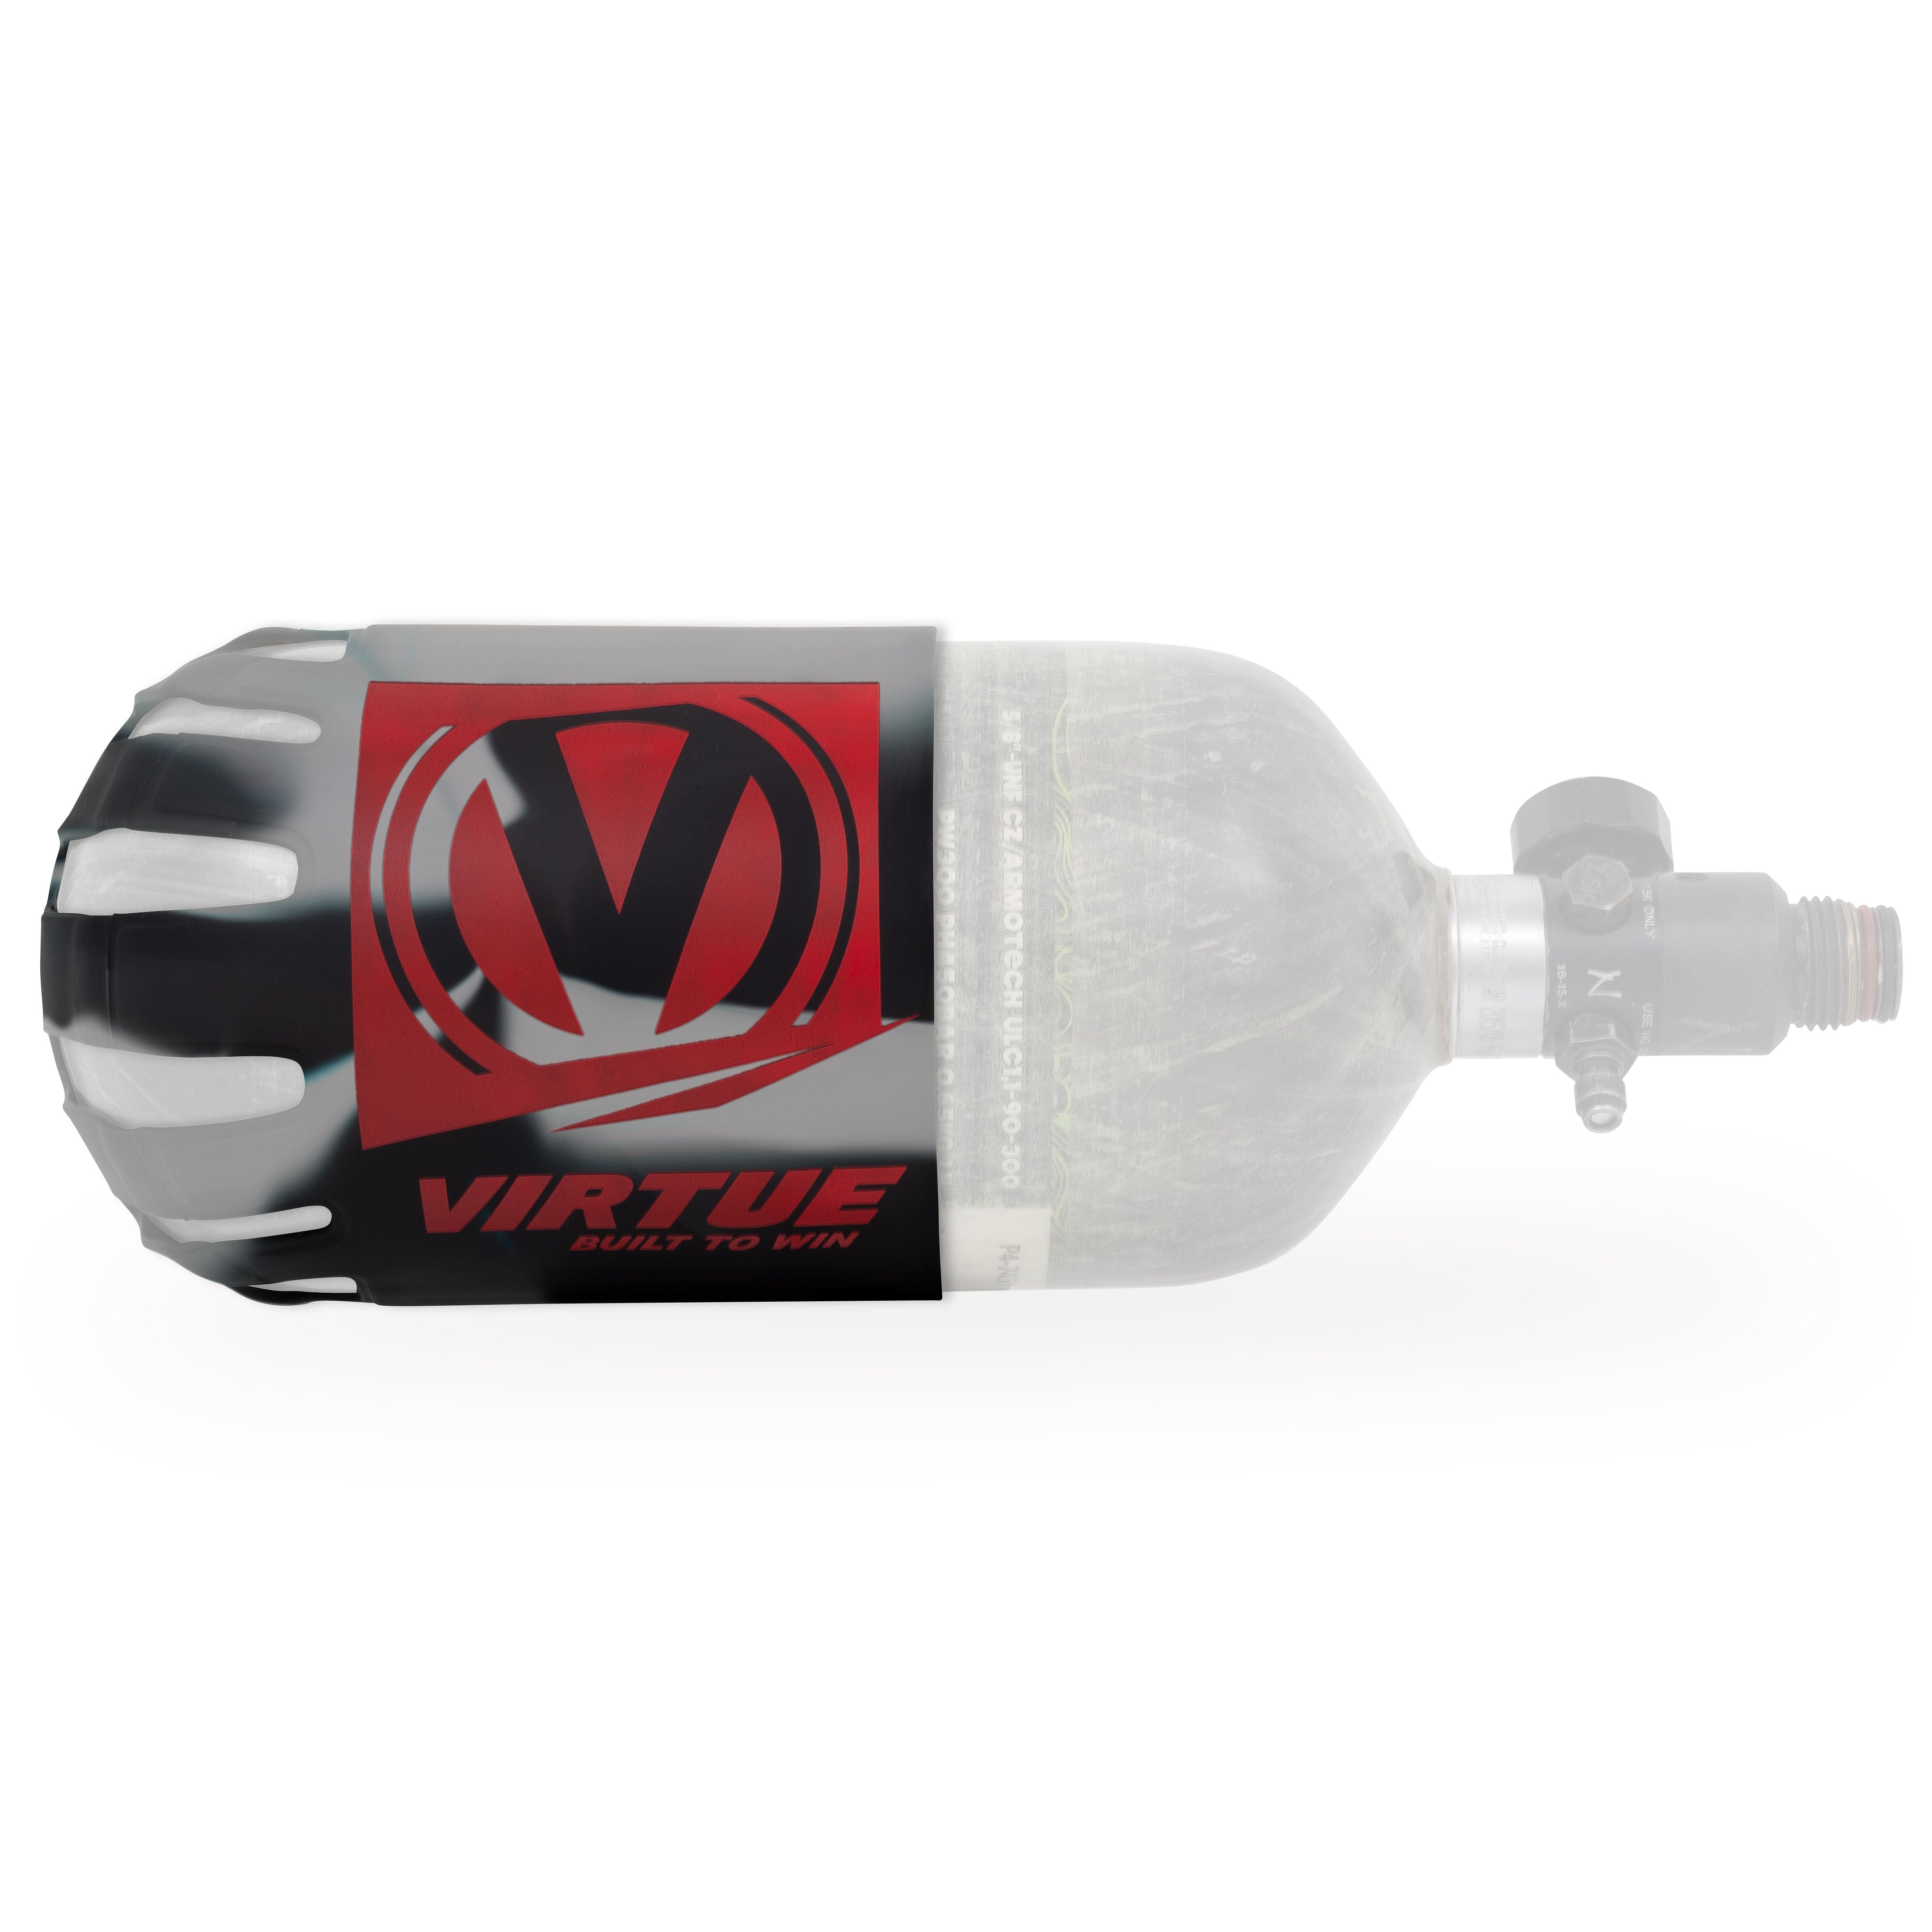 Virtue Silicone Tank Cover - Red